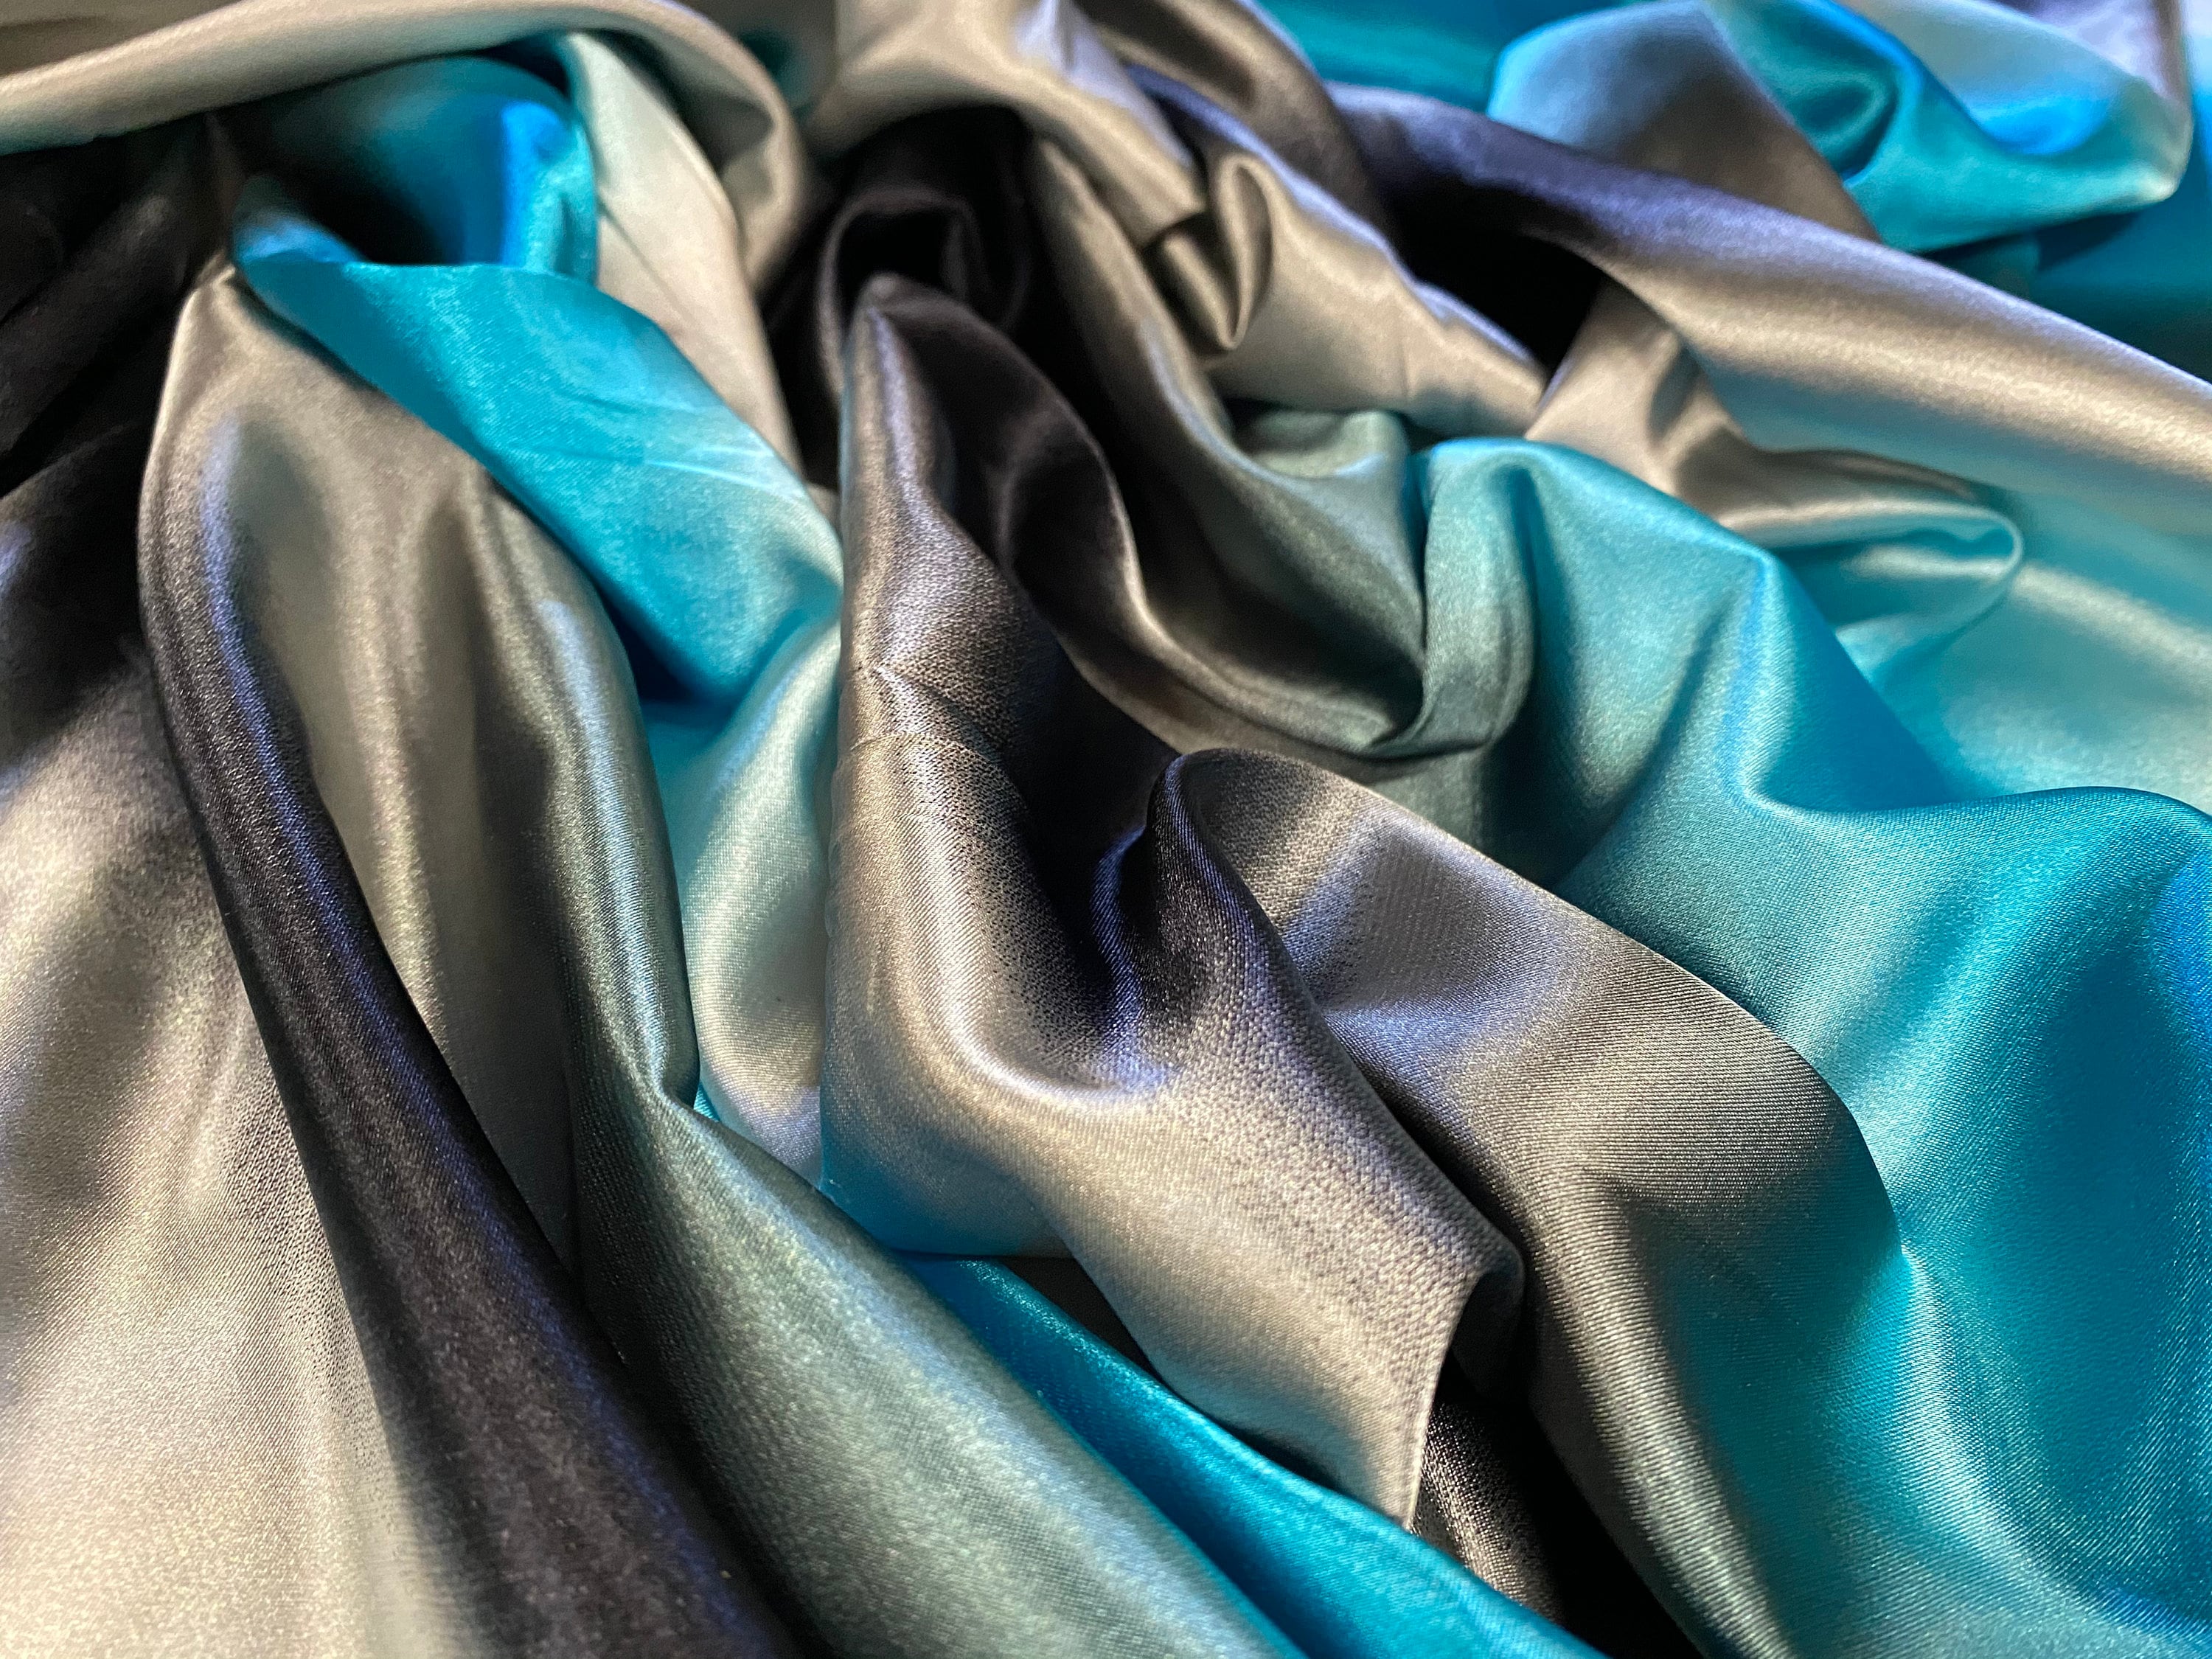 High End Green Teal Stretch Soft Sheen Charmeuse Satin Fabric 58 By The  Yard